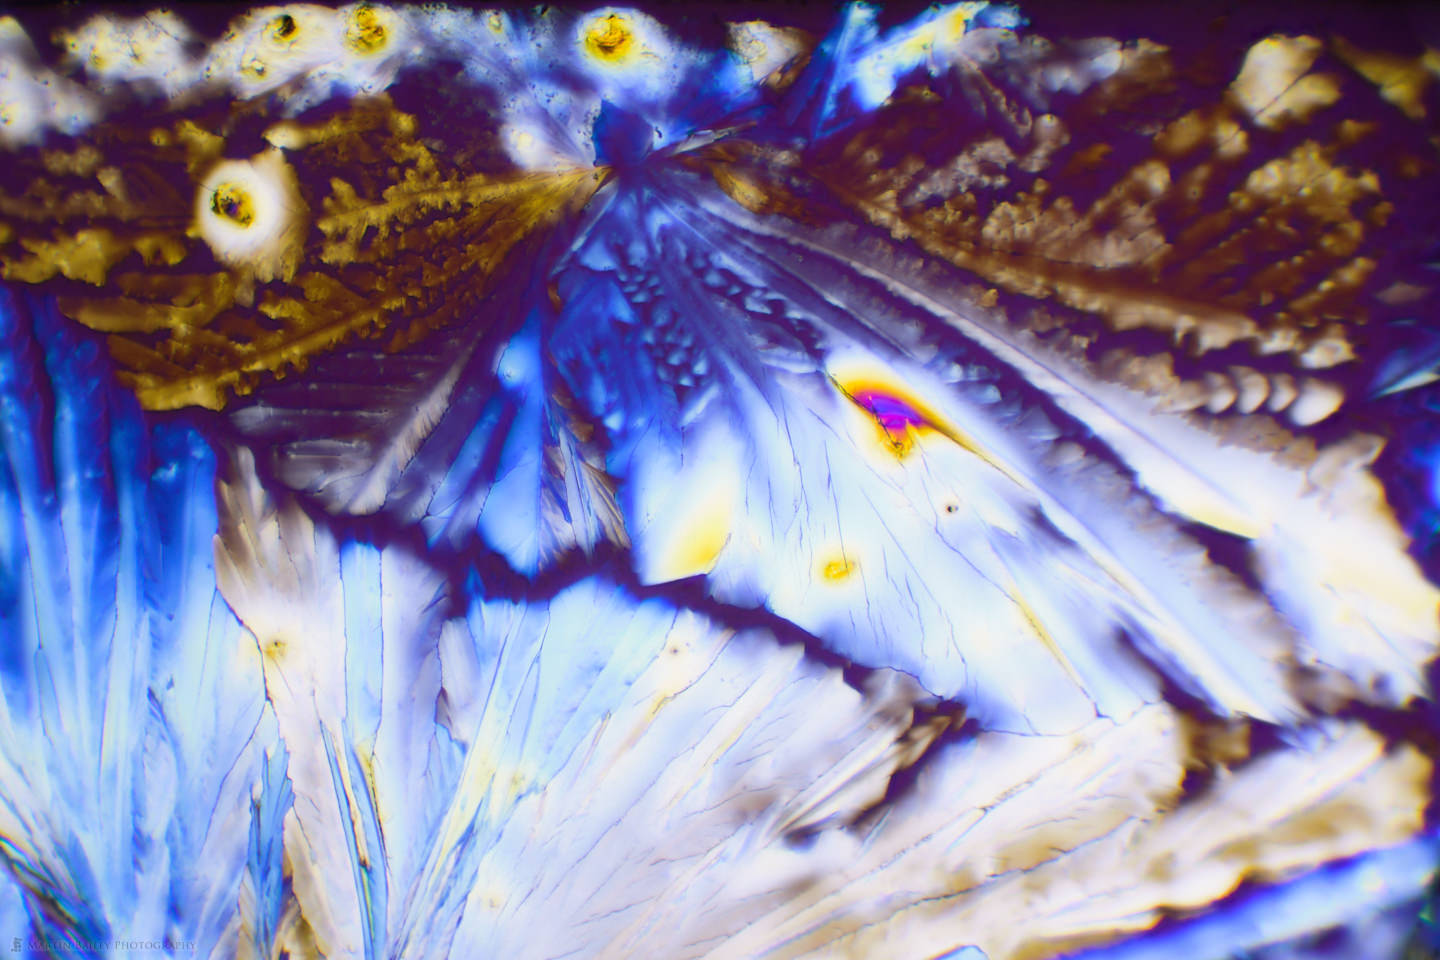 Feathered Crystals (Citric Acid Crystals 100X 14 Frames)